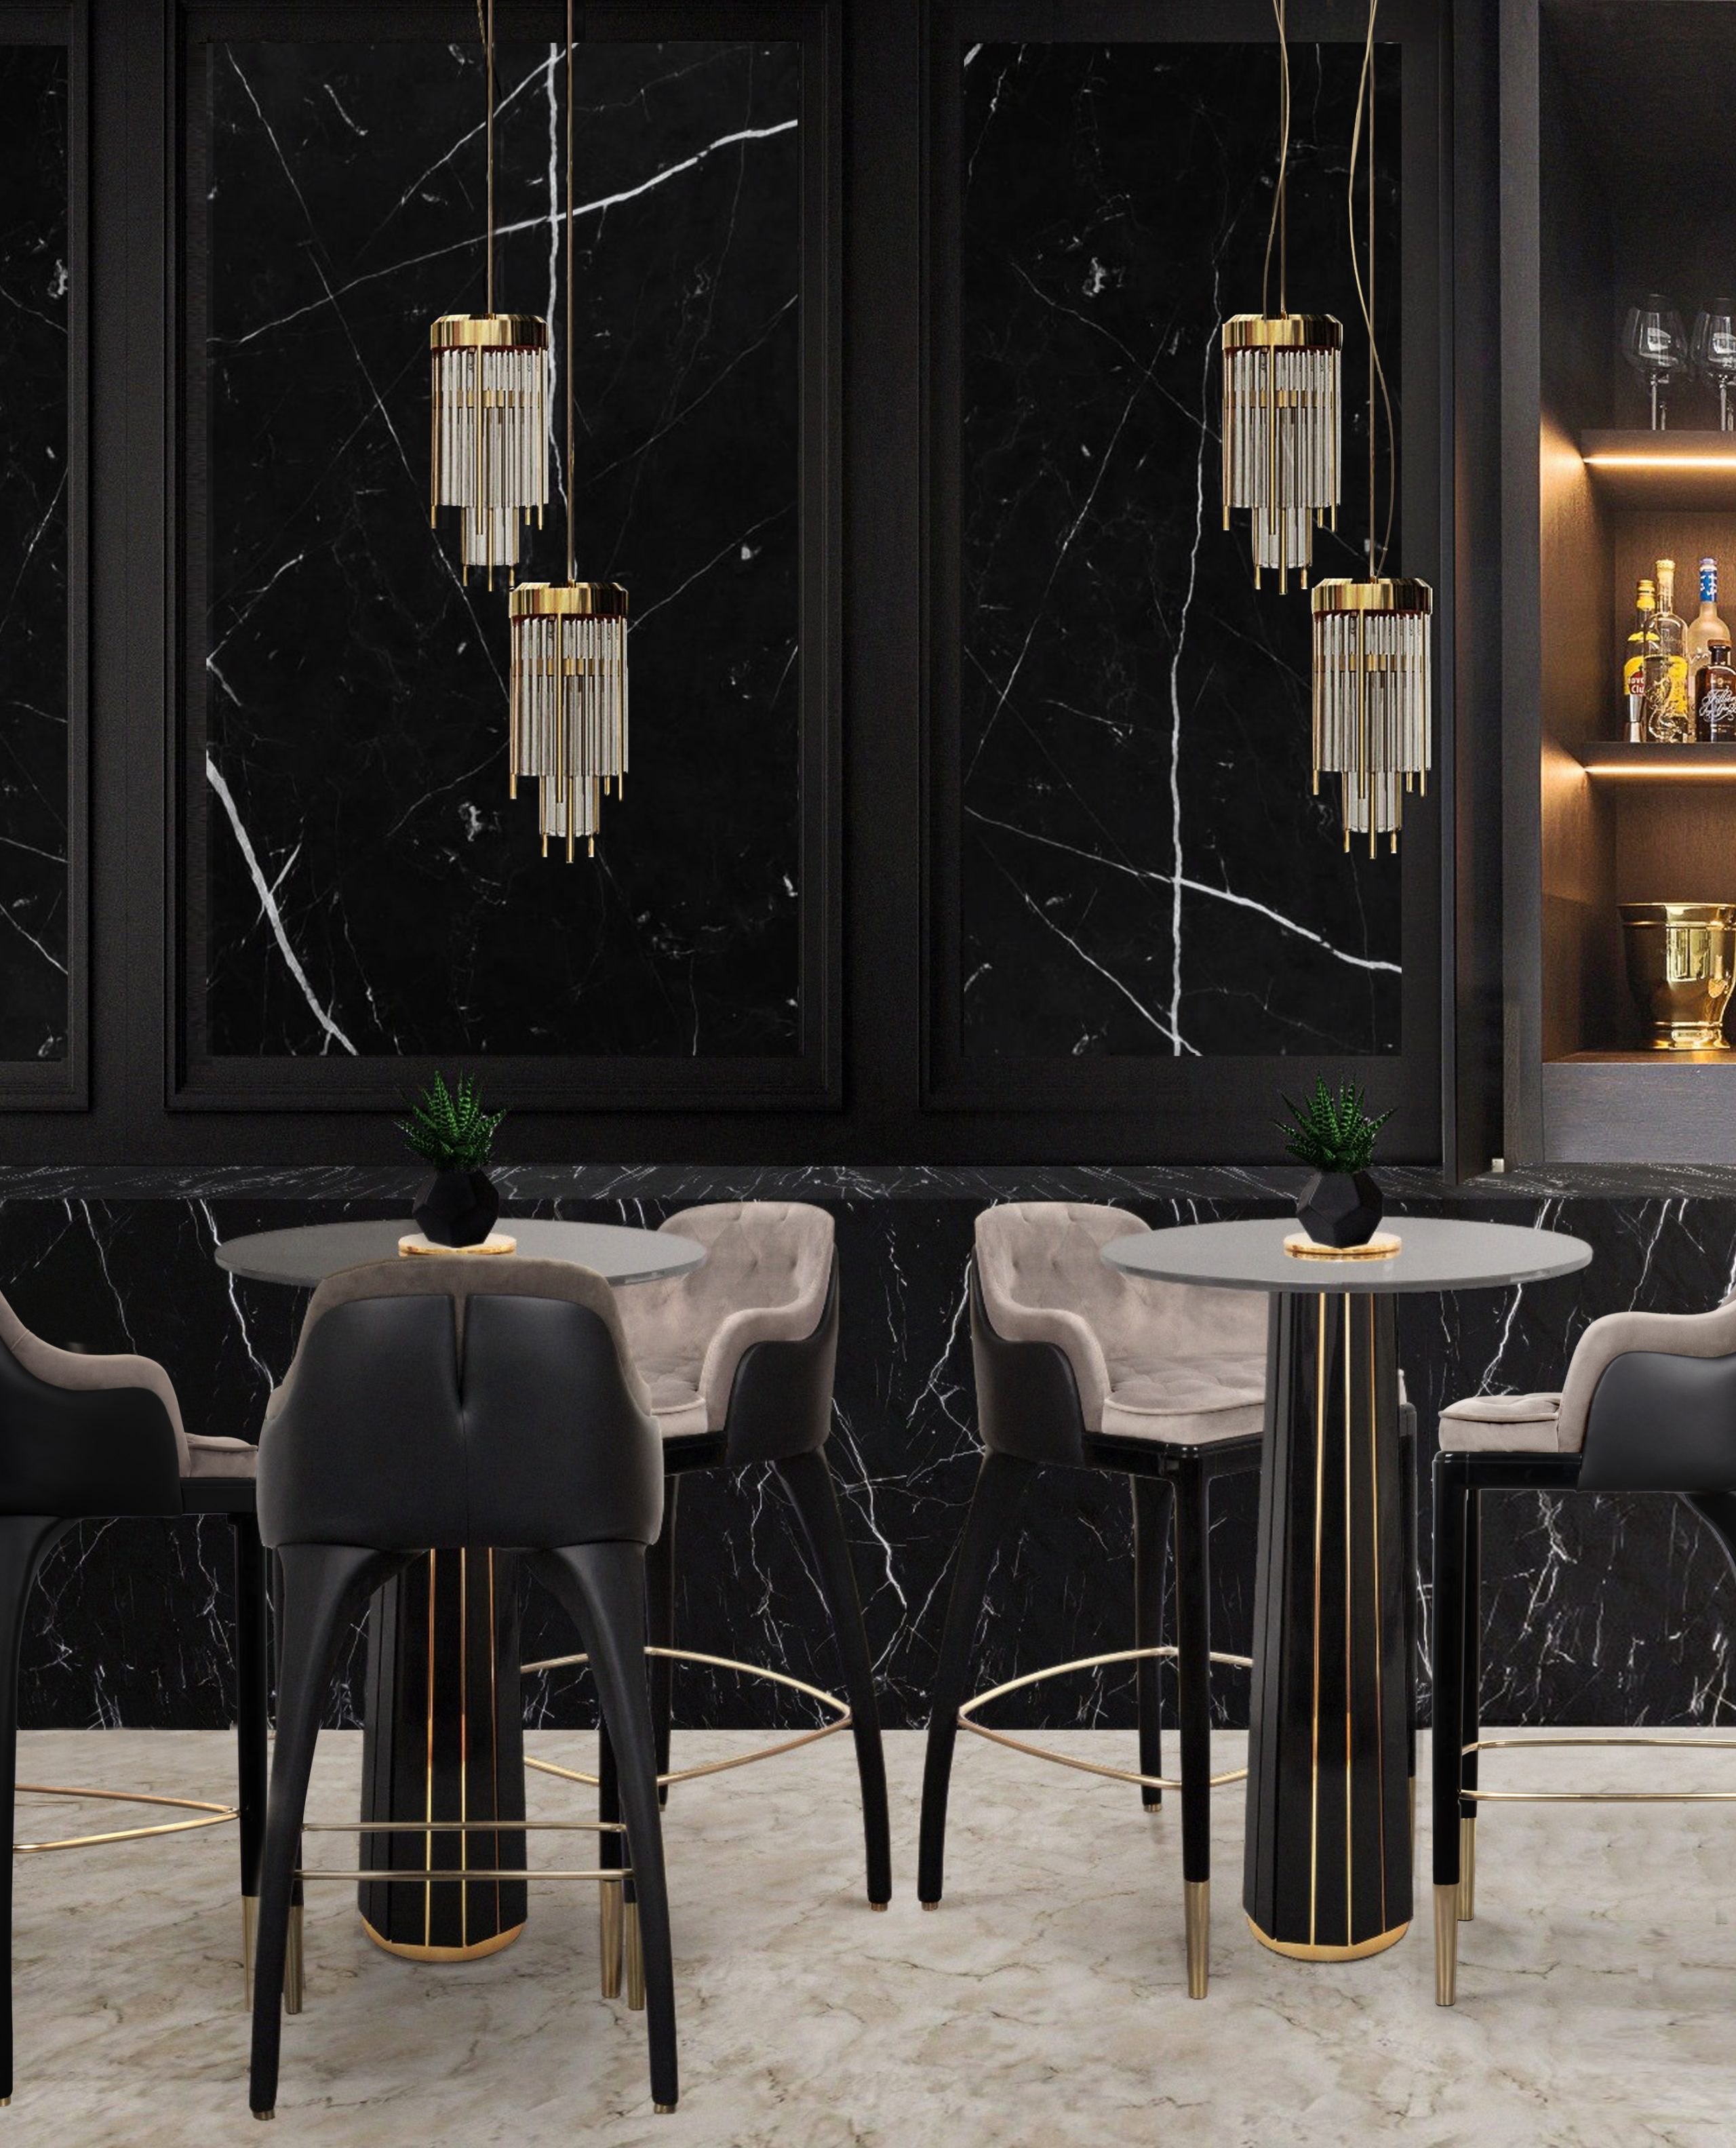 Luxxu´s Dining Room Inspirations